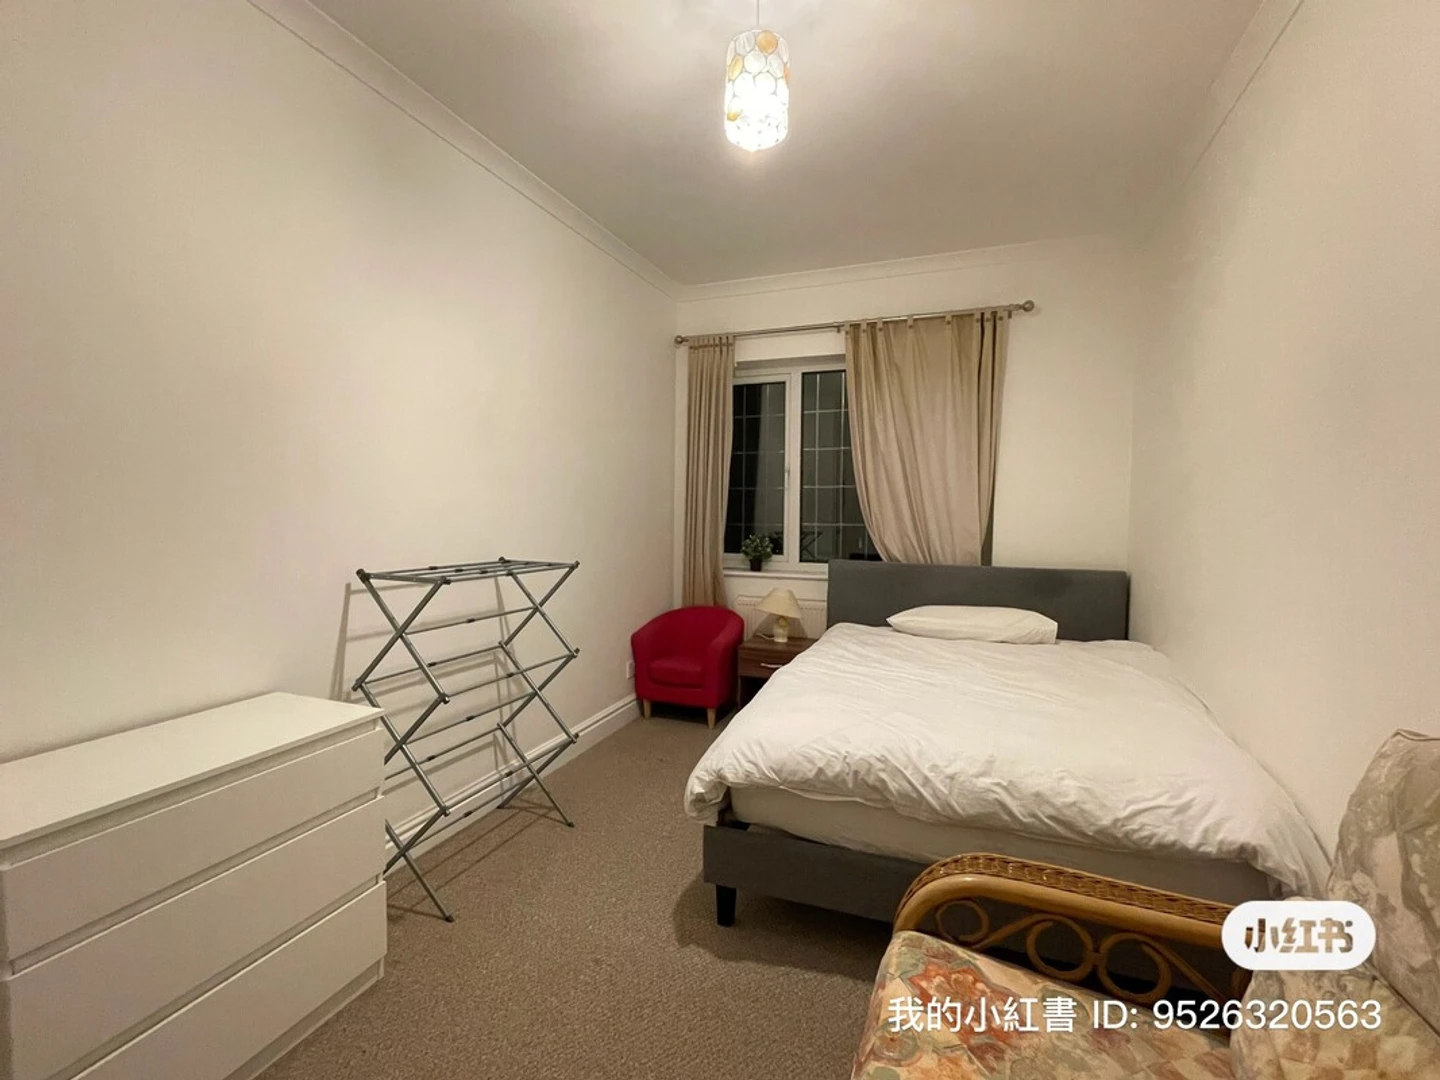 Renting rooms by the month in Cambridge